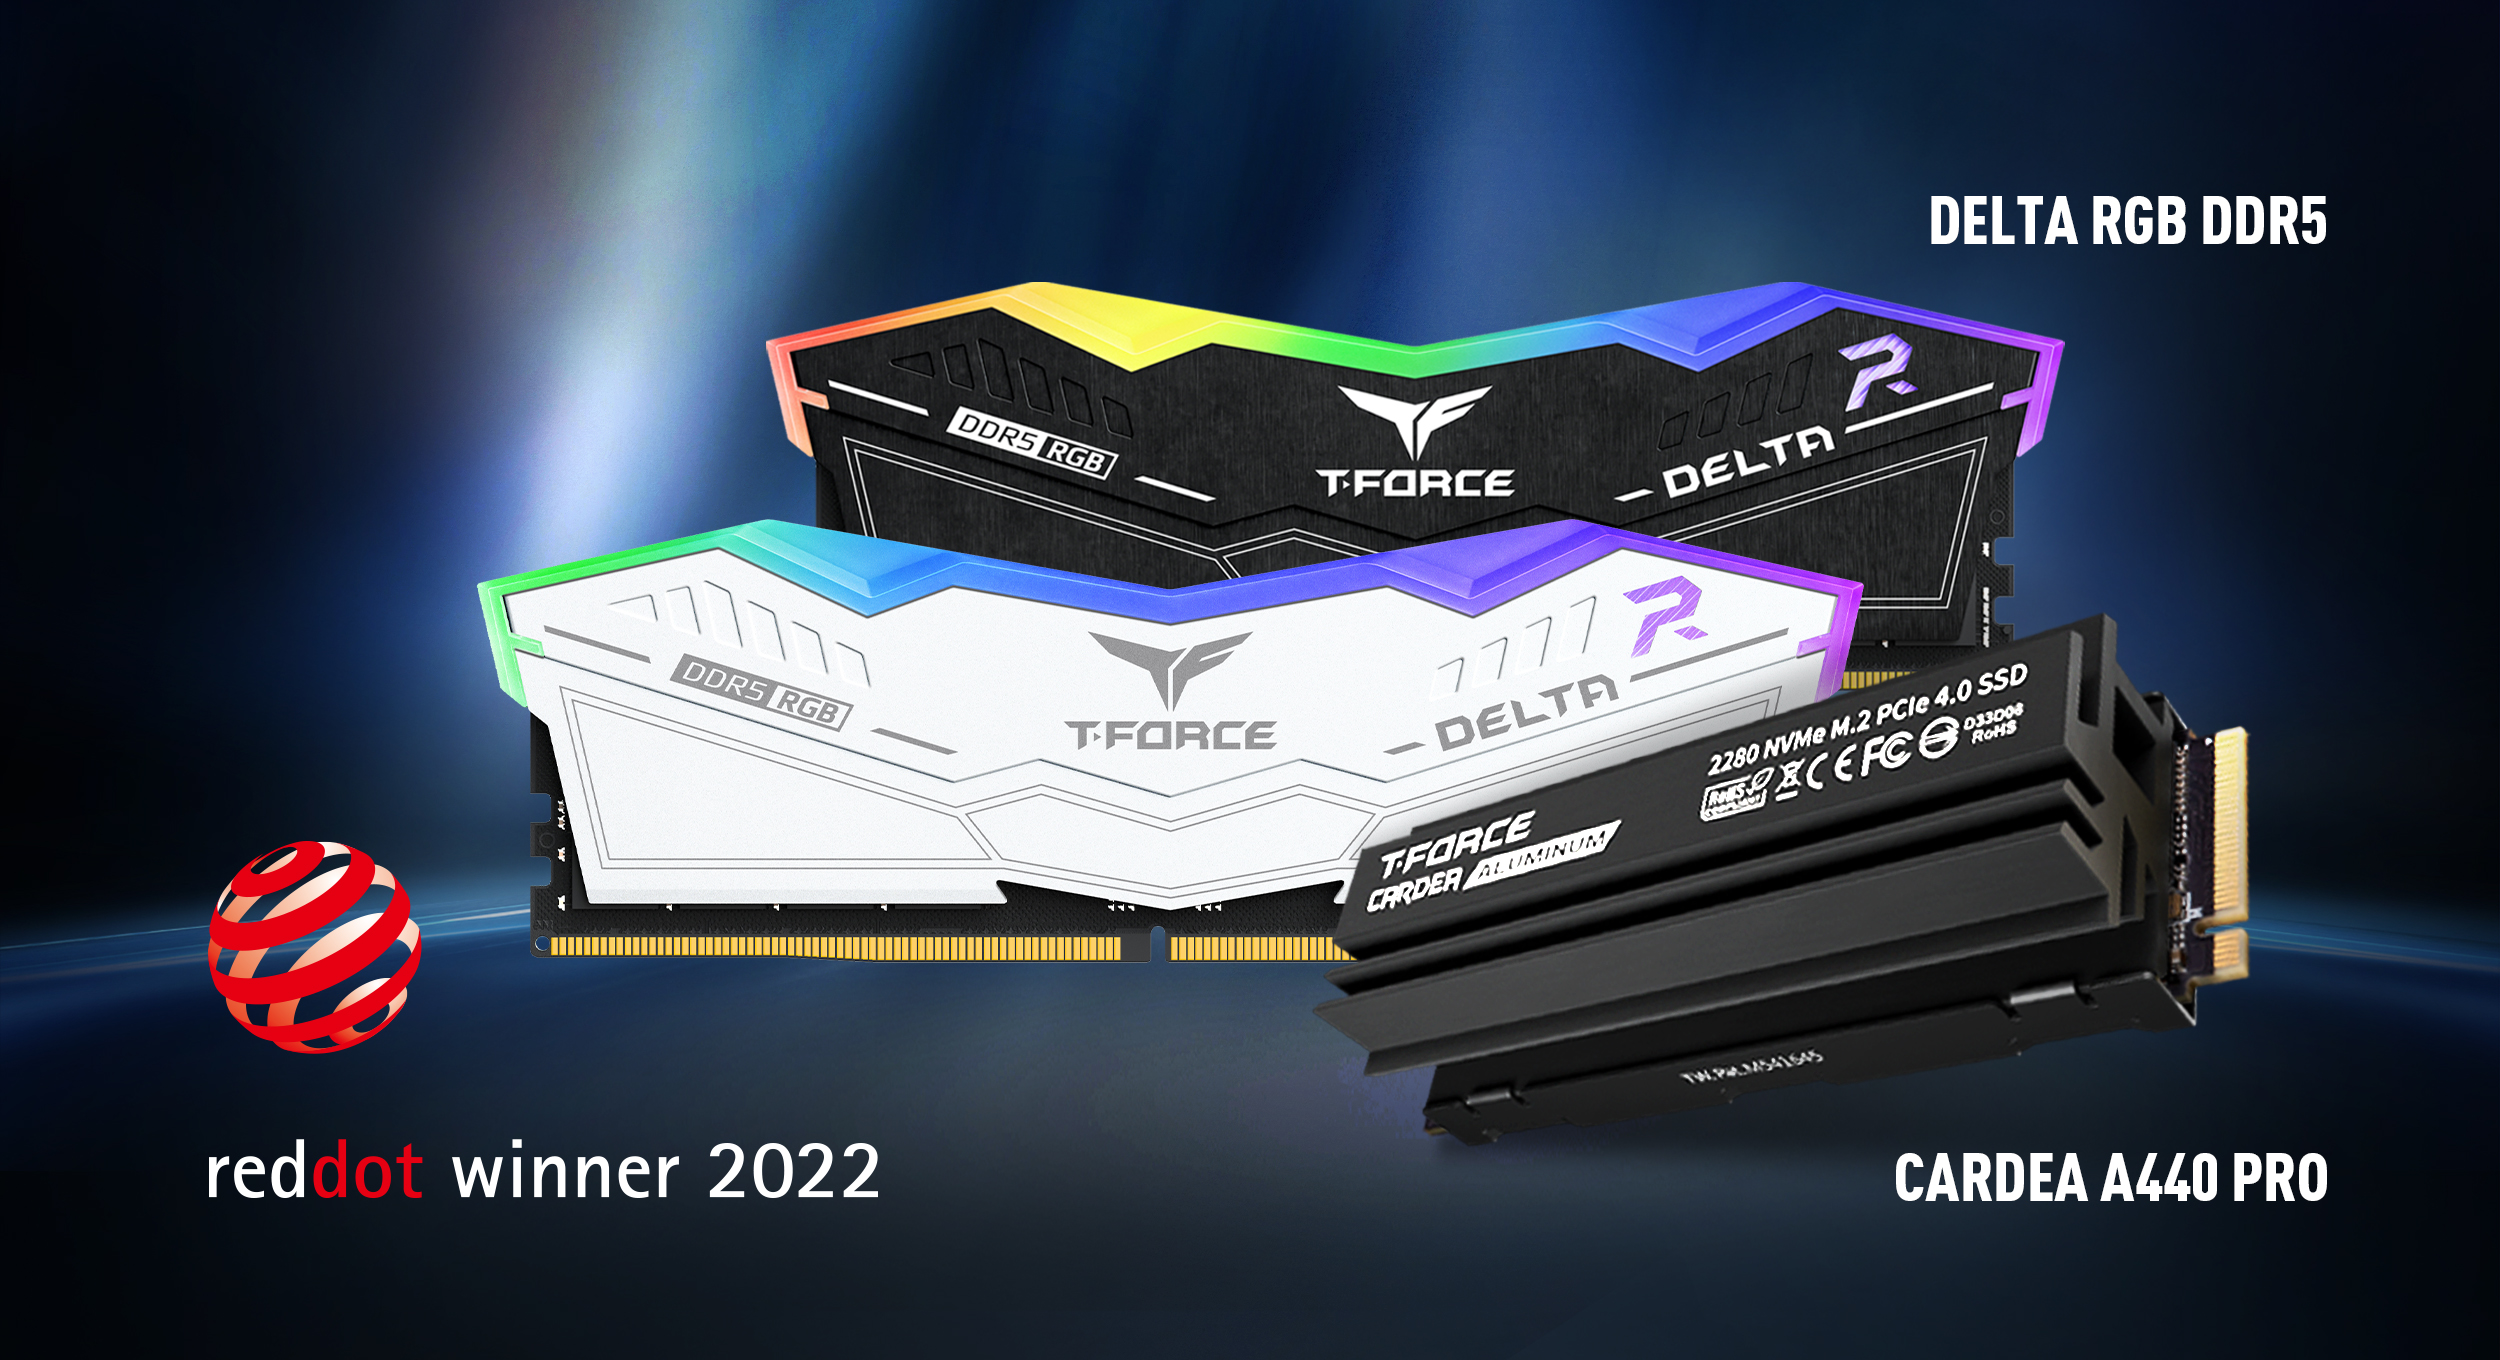 TEAMGROUP's T-FORCE DELTA RGB DDR5 Gaming Memory and CARDEA A440 PRO M.2 PCIe SSD Both Awarded with 2022 Red Dot Design Awards